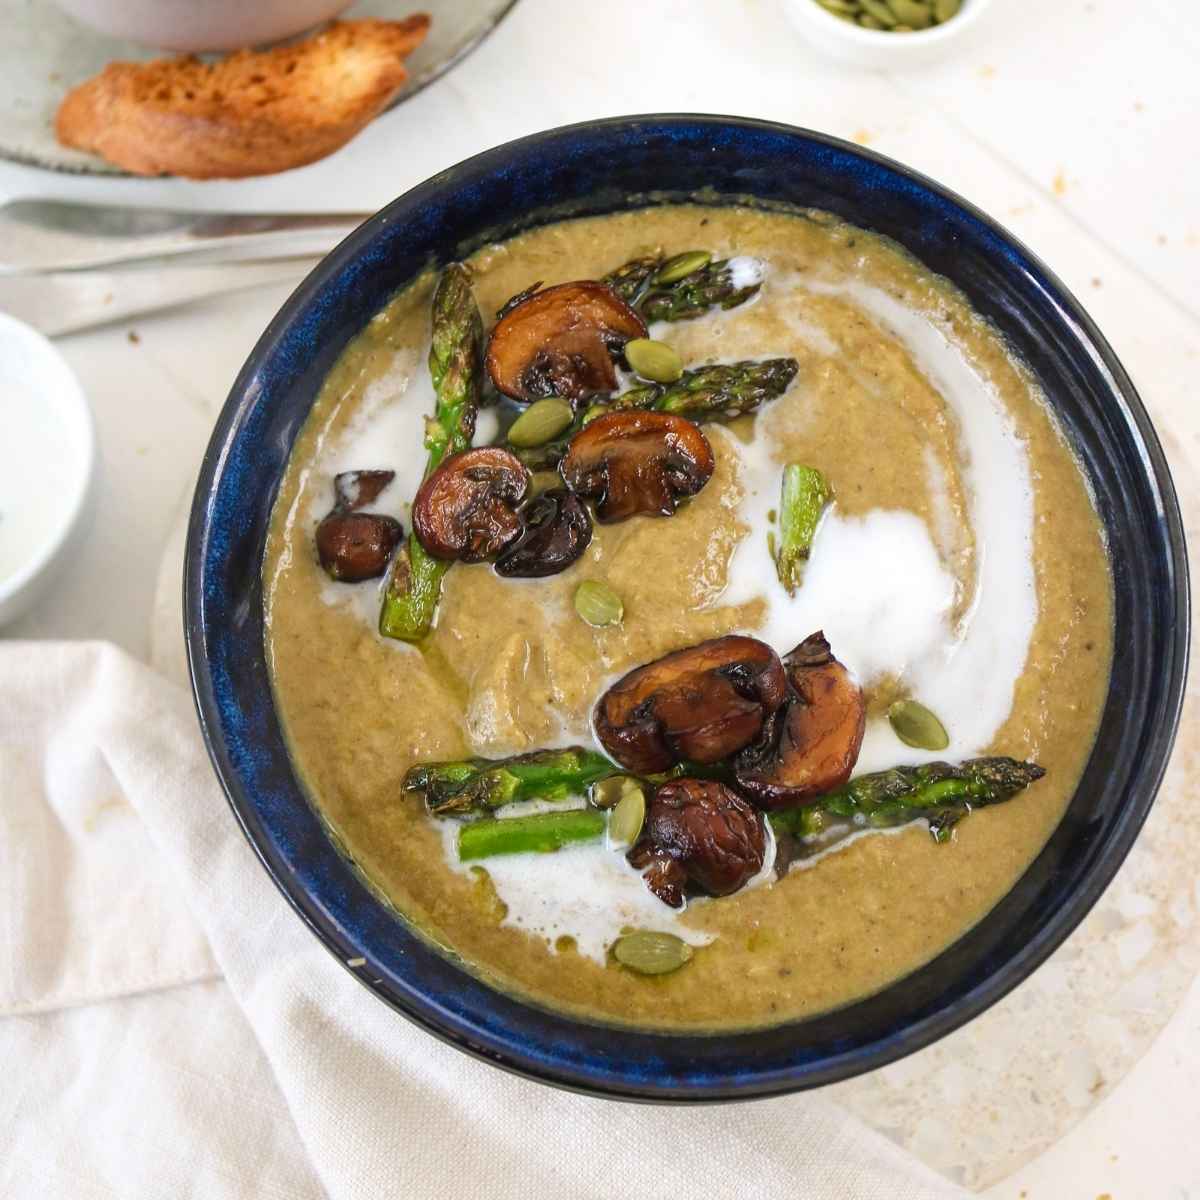 Asparagus and mushroom soup served in a blue bowl